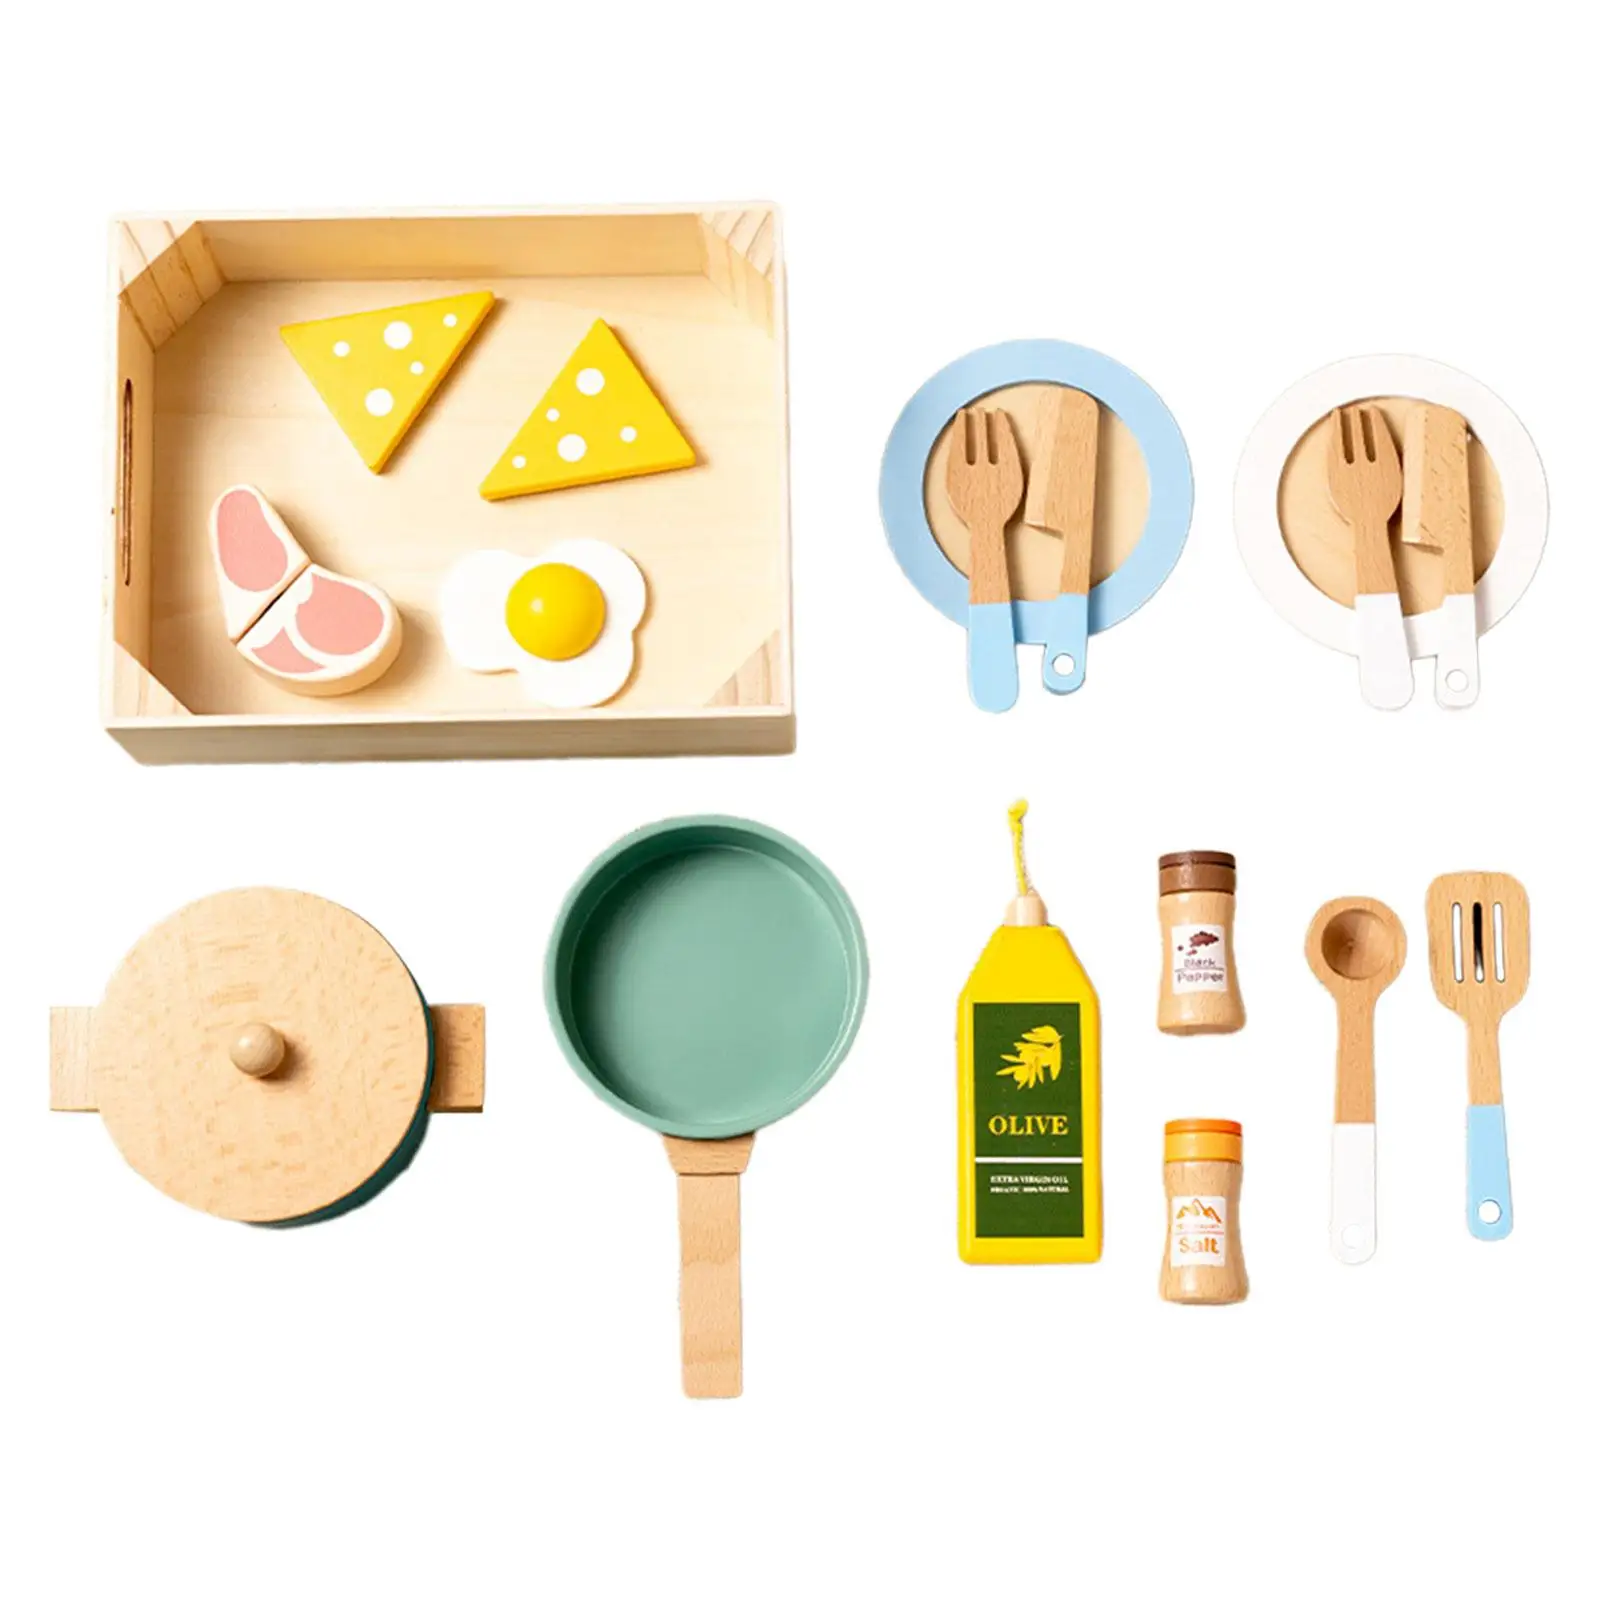 Kids Pretend Play Role Play Montessori Toddlers Cooking Playset for Handcraft Landscape Decorations Party Favors Birthday Gift